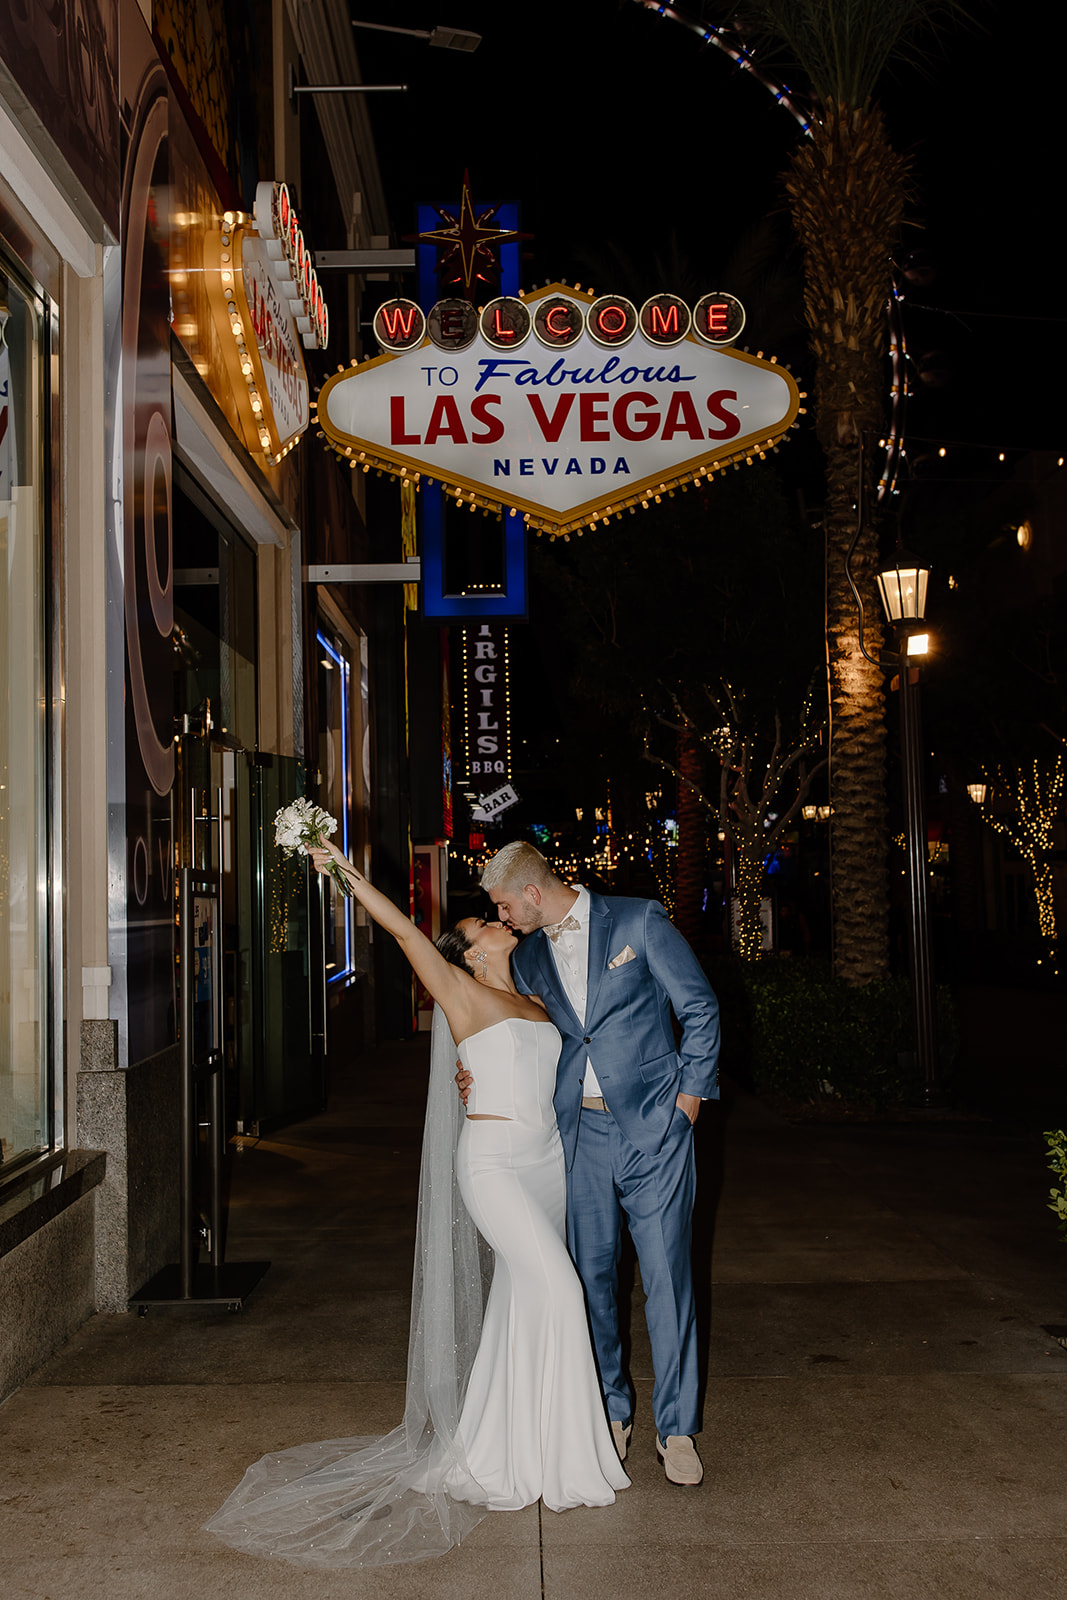 Bride and groom kiss under a welcome to Las Vegas sign